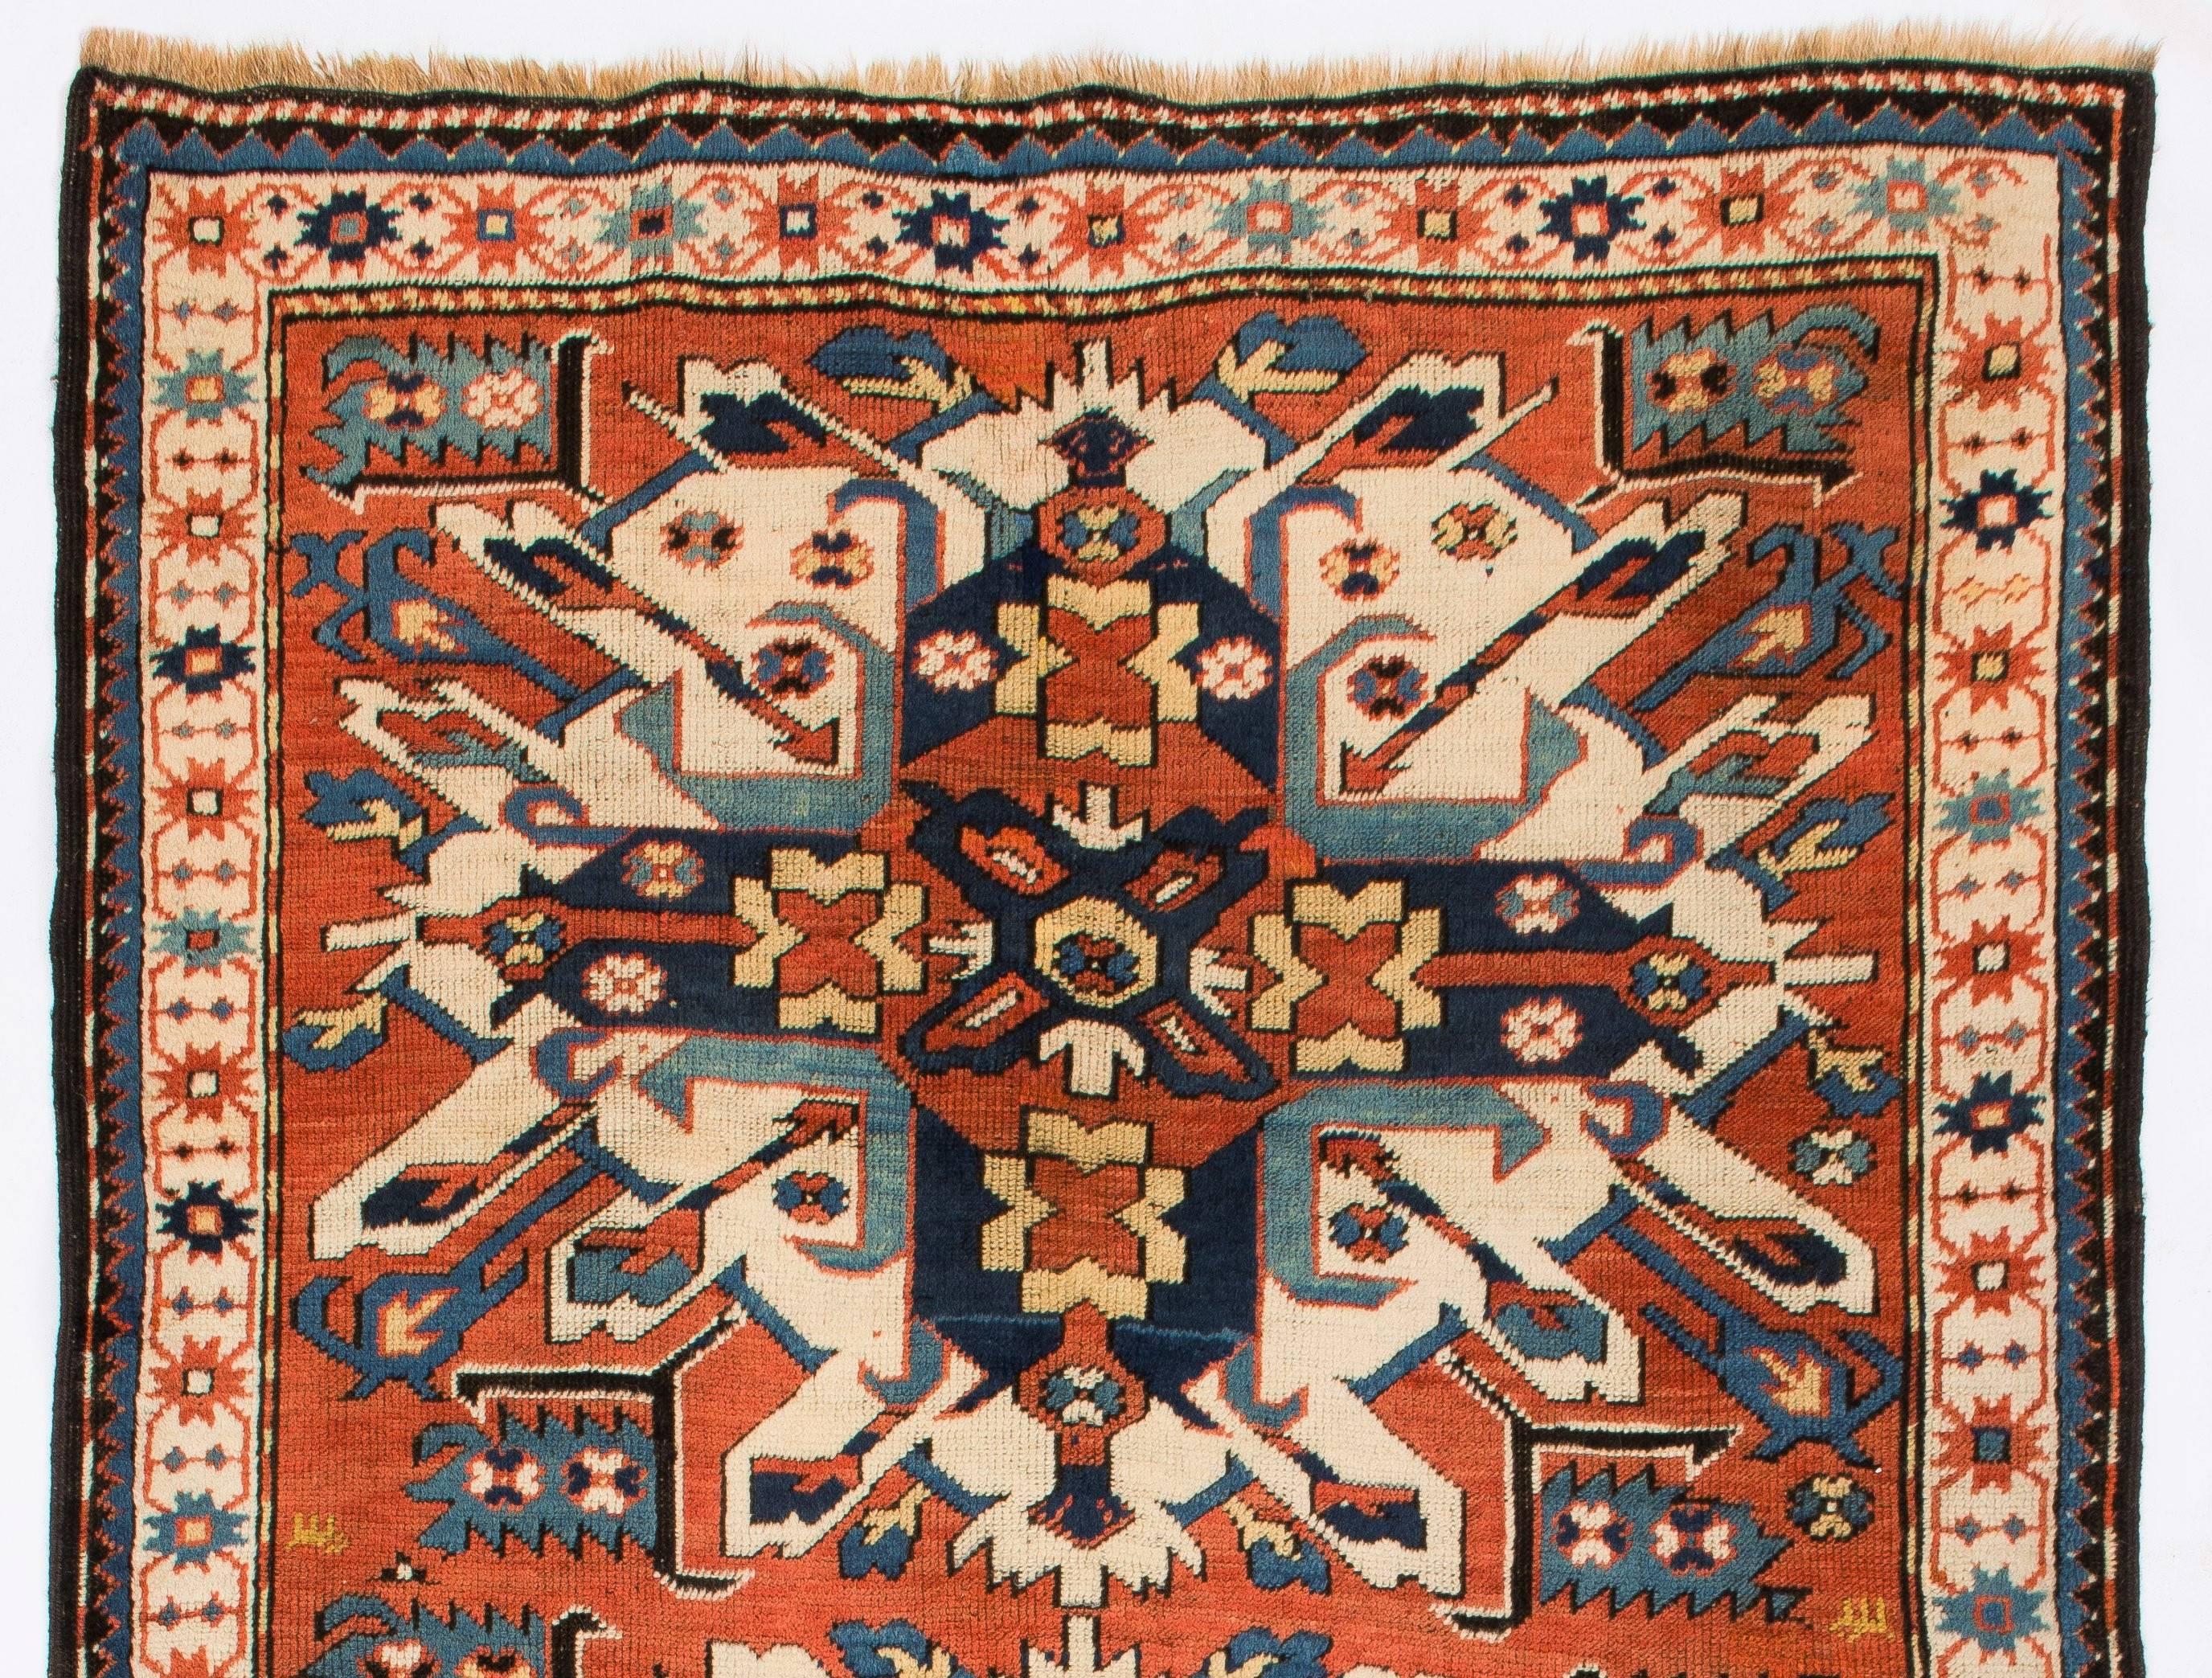 An antique Caucasian rug from the village of Chelaberd in Southern Karabagh. This highly popular so called Sunburst or Eagle Kazak design rugs are some of the most collectible and sought after ones among all antique Caucasian works of textile arts.